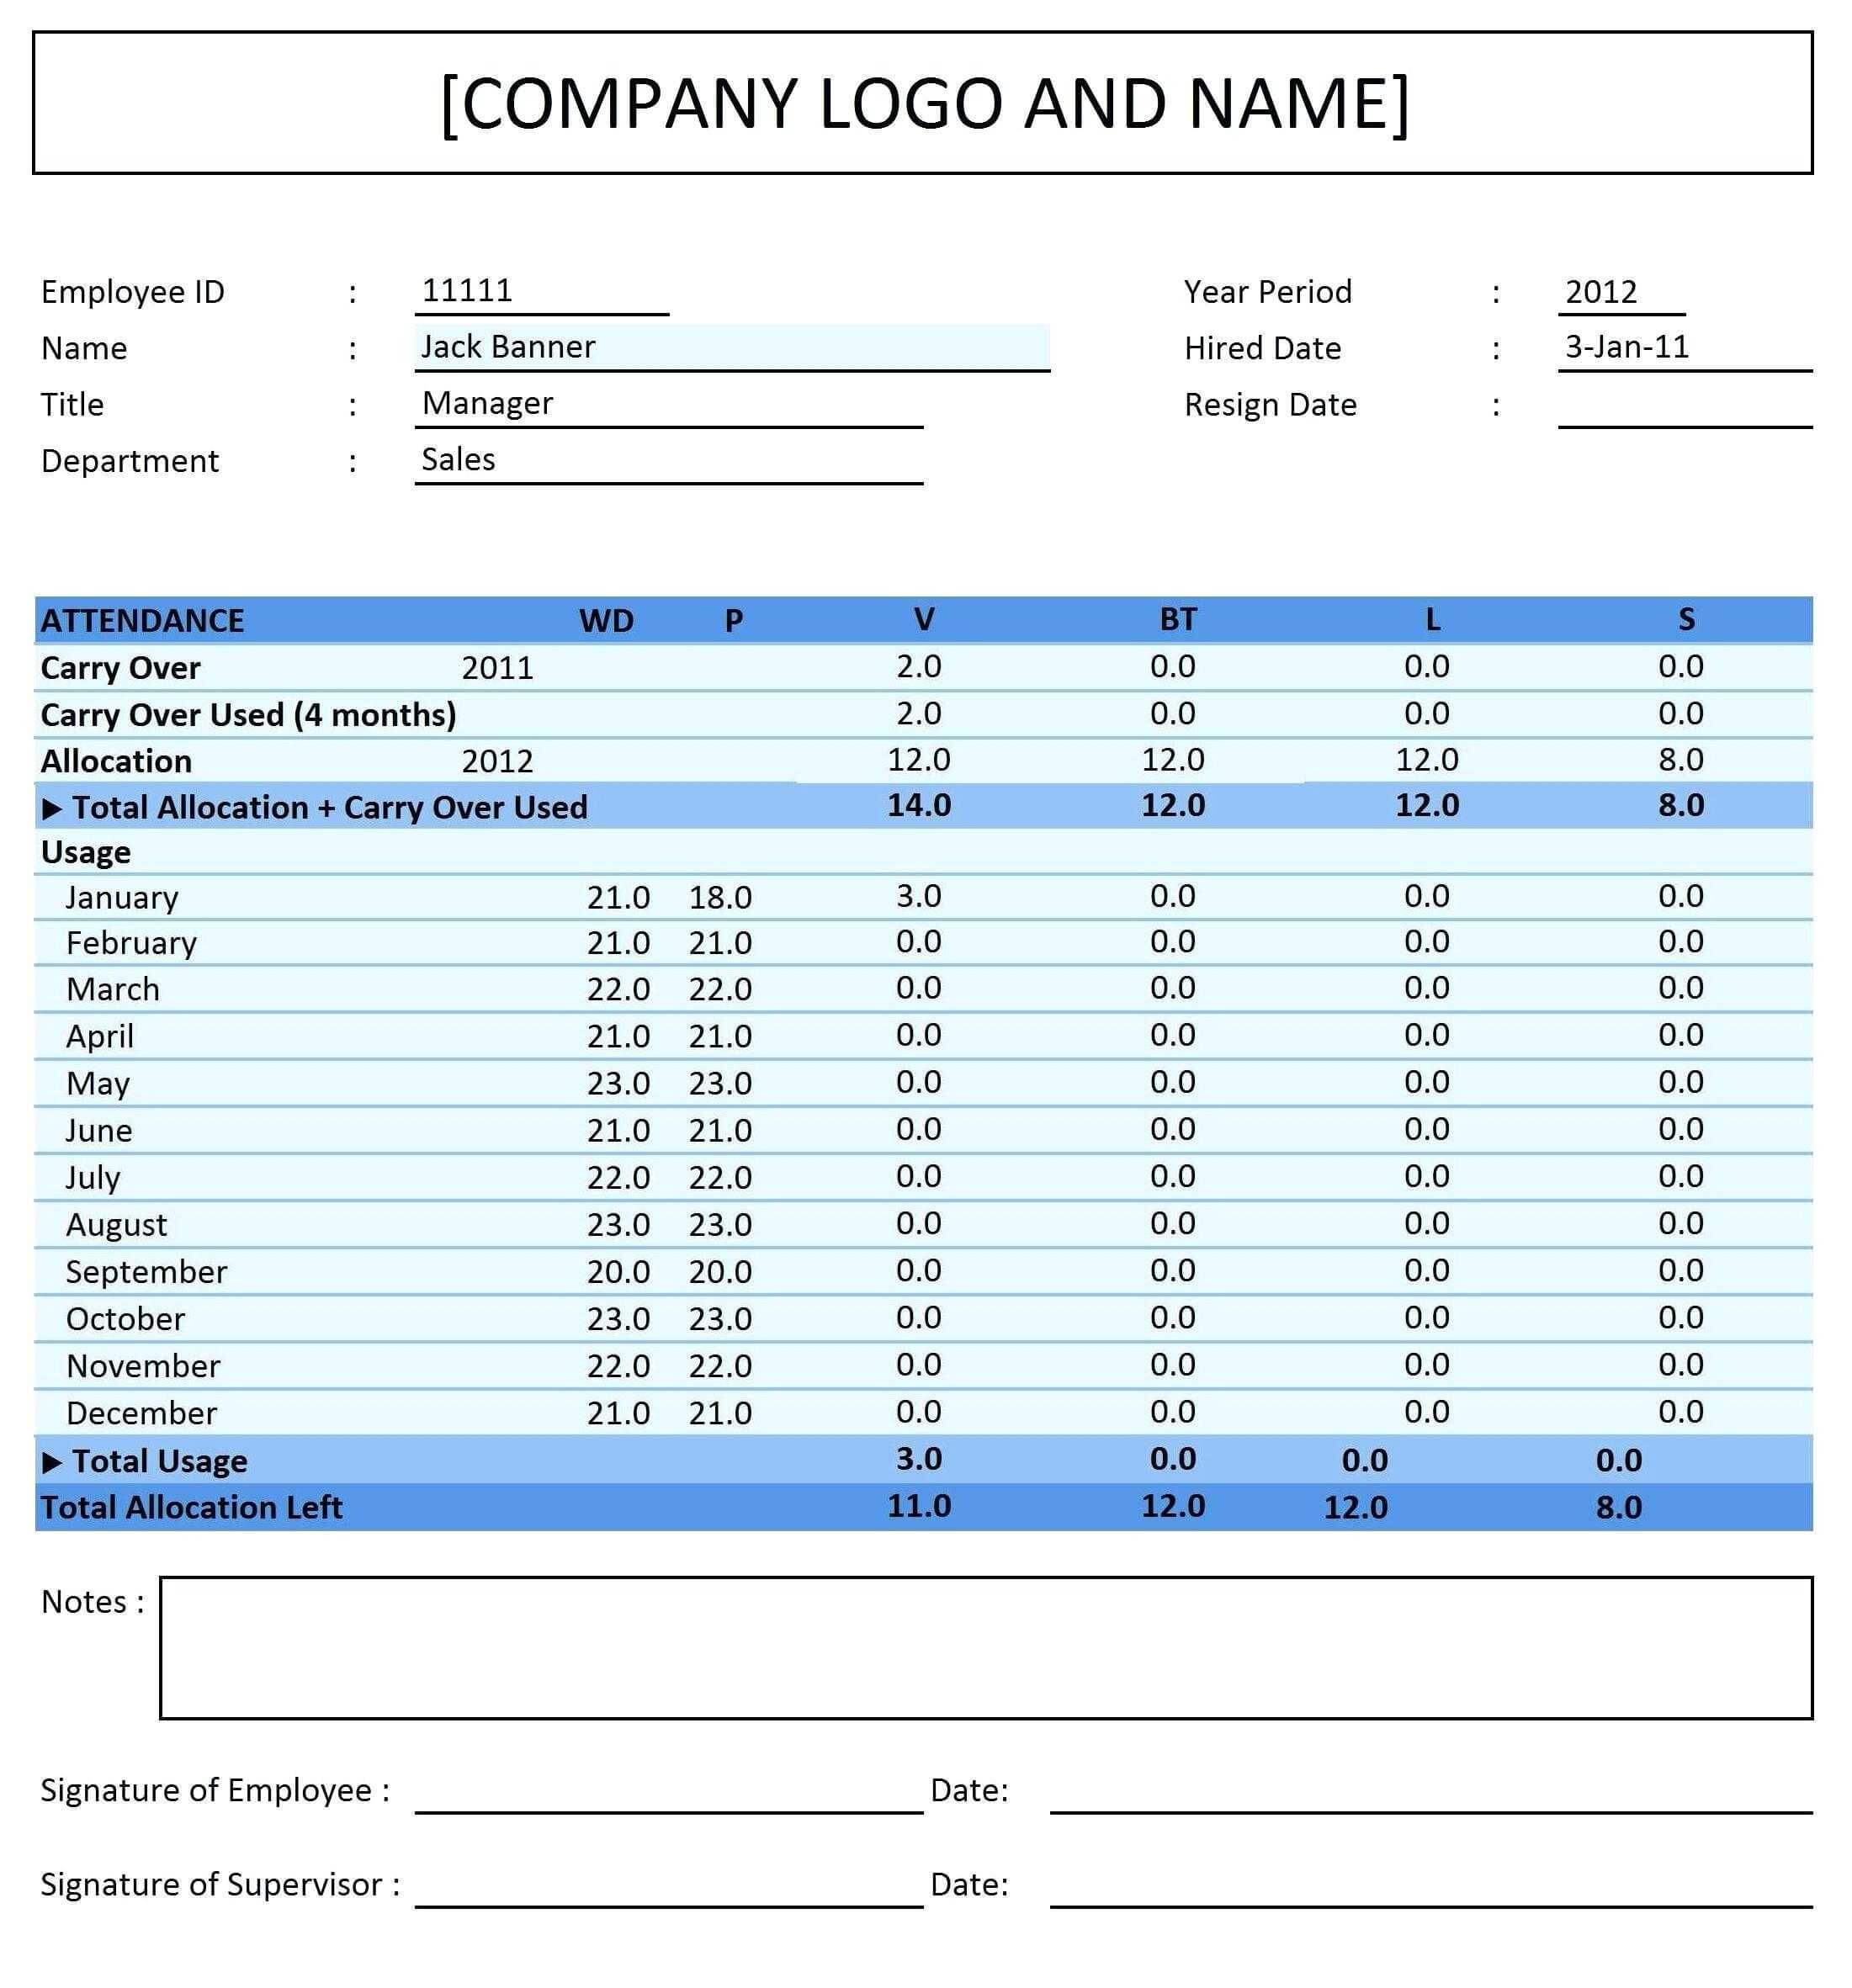 Job Hazard Analysis Template Excel | Glendale Community For Safety Analysis Report Template